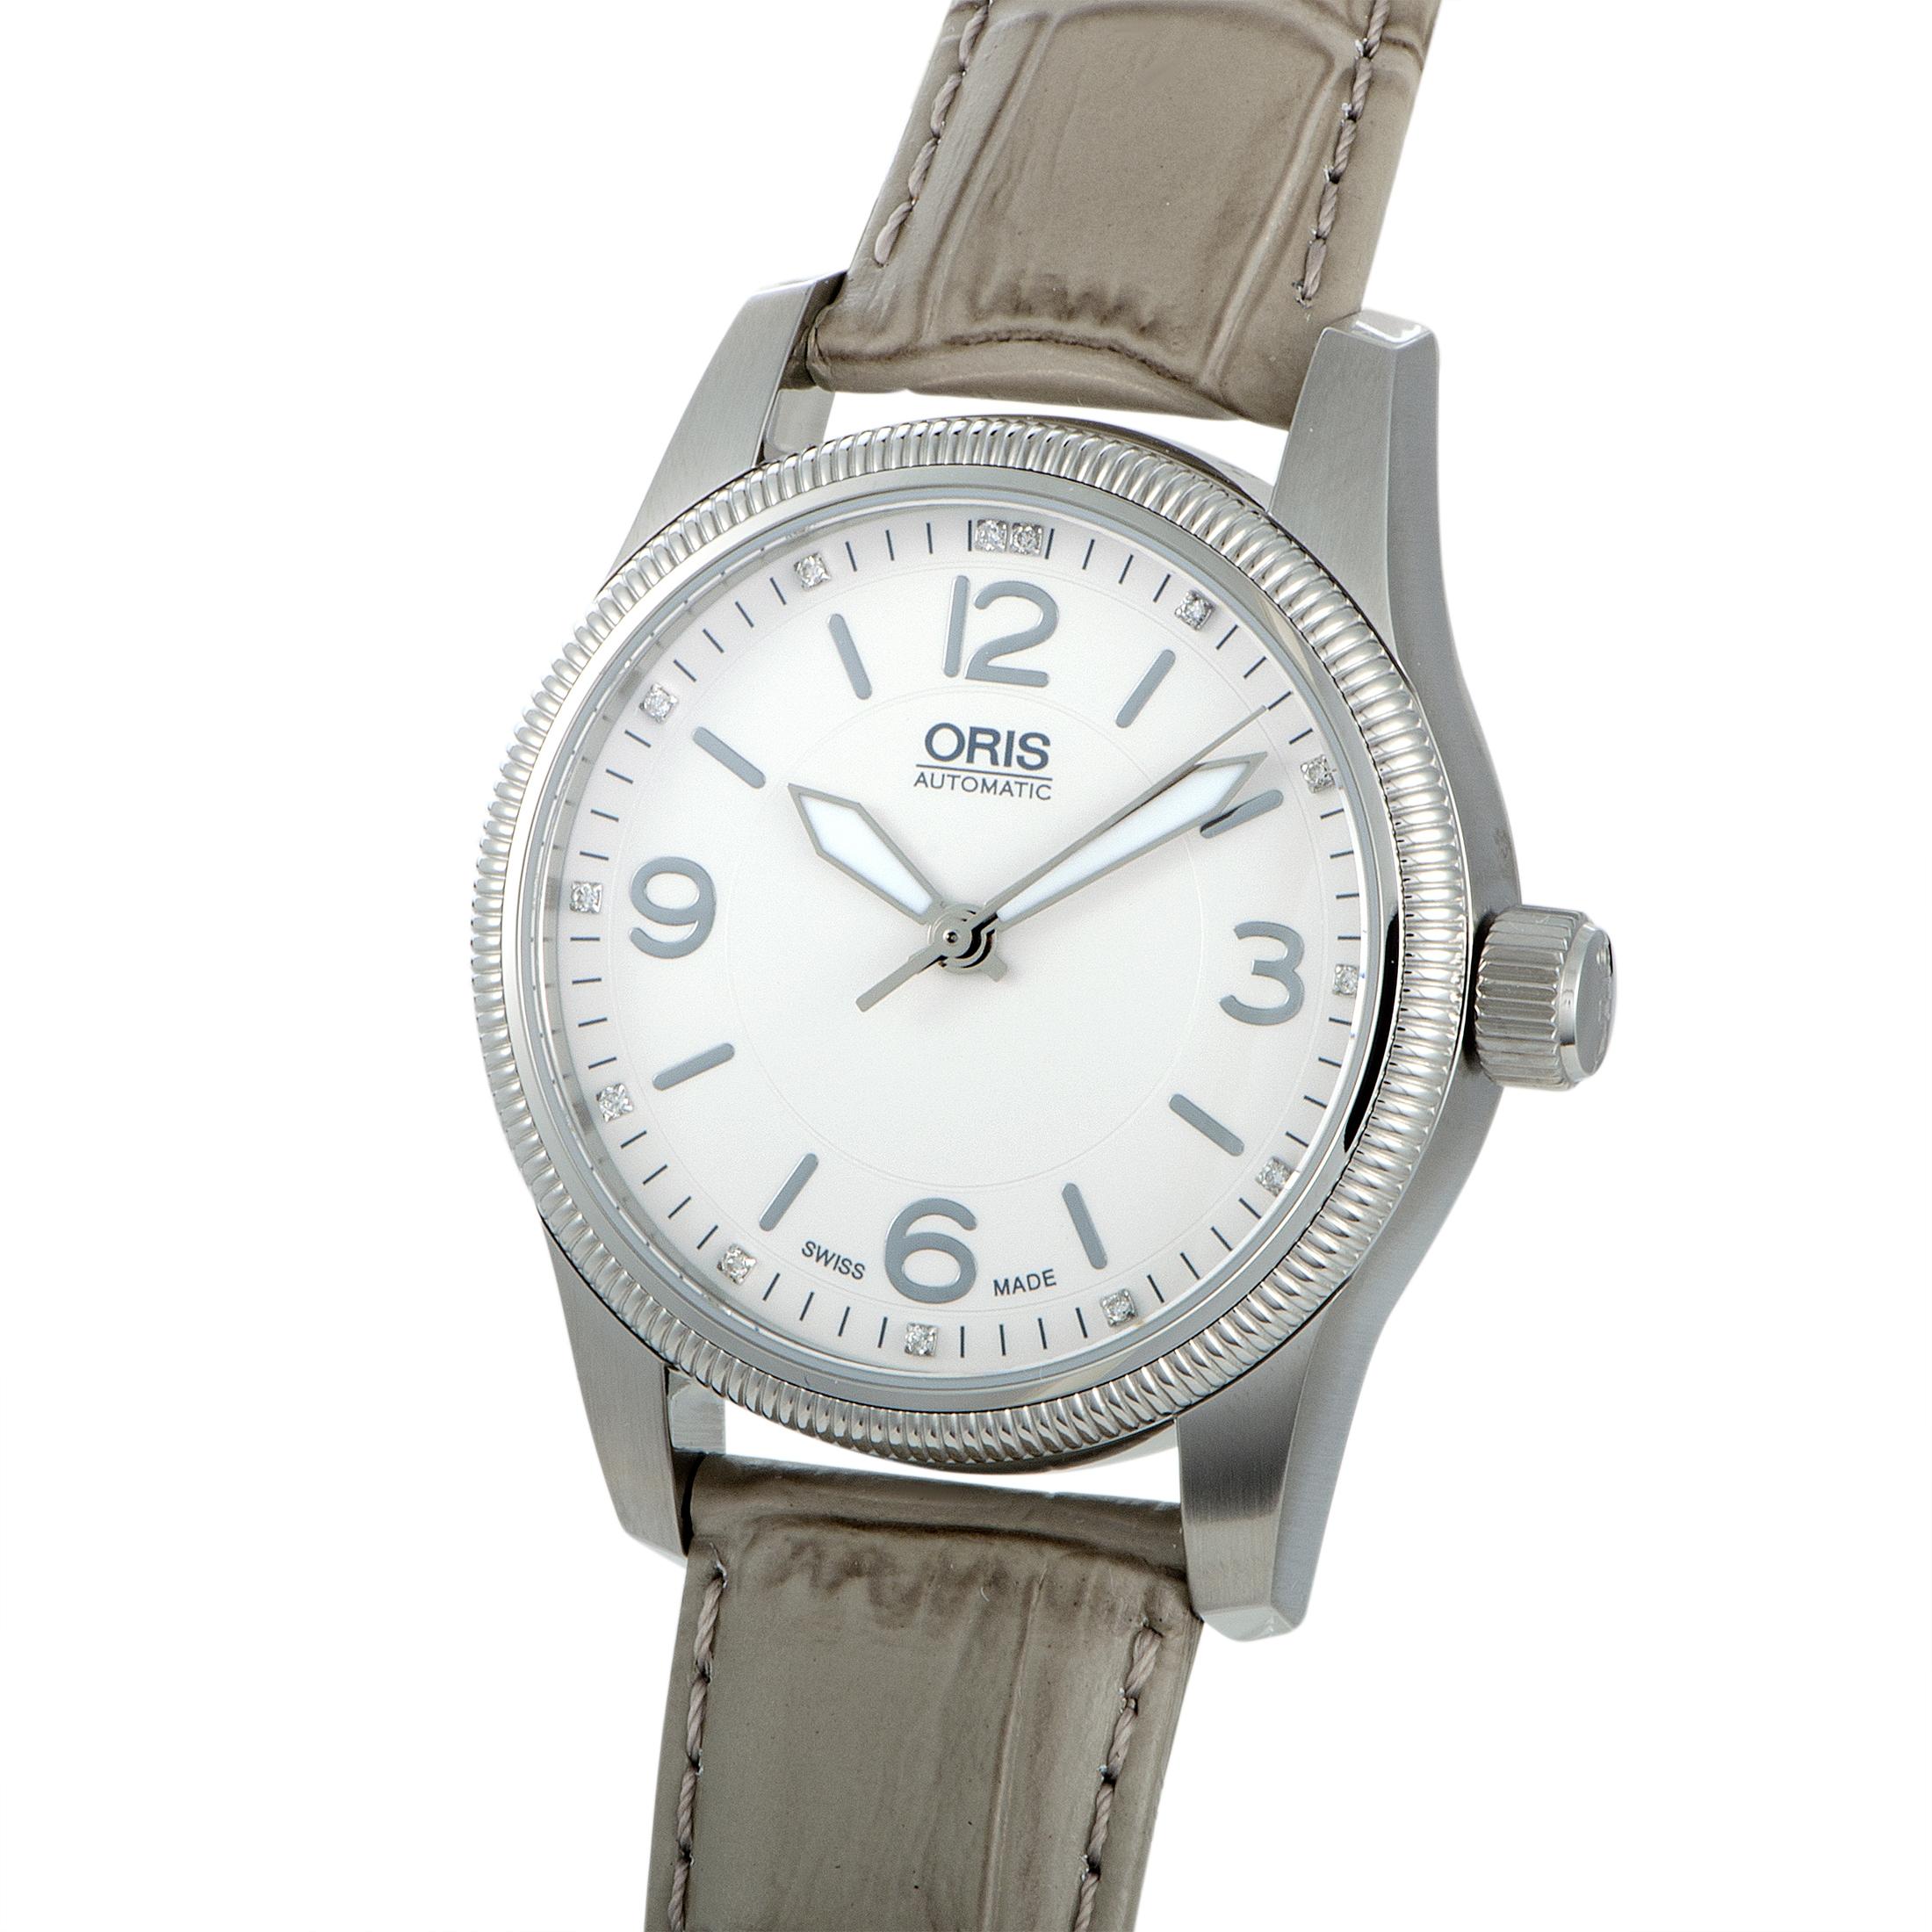 This is the Oris Big Crown, reference number 01 733 7649 4031.

It is presented with a stainless steel case that boasts see-through back and offers water resistance of 100 meters. The case is mounted onto a gray leather strap fitted with a tang